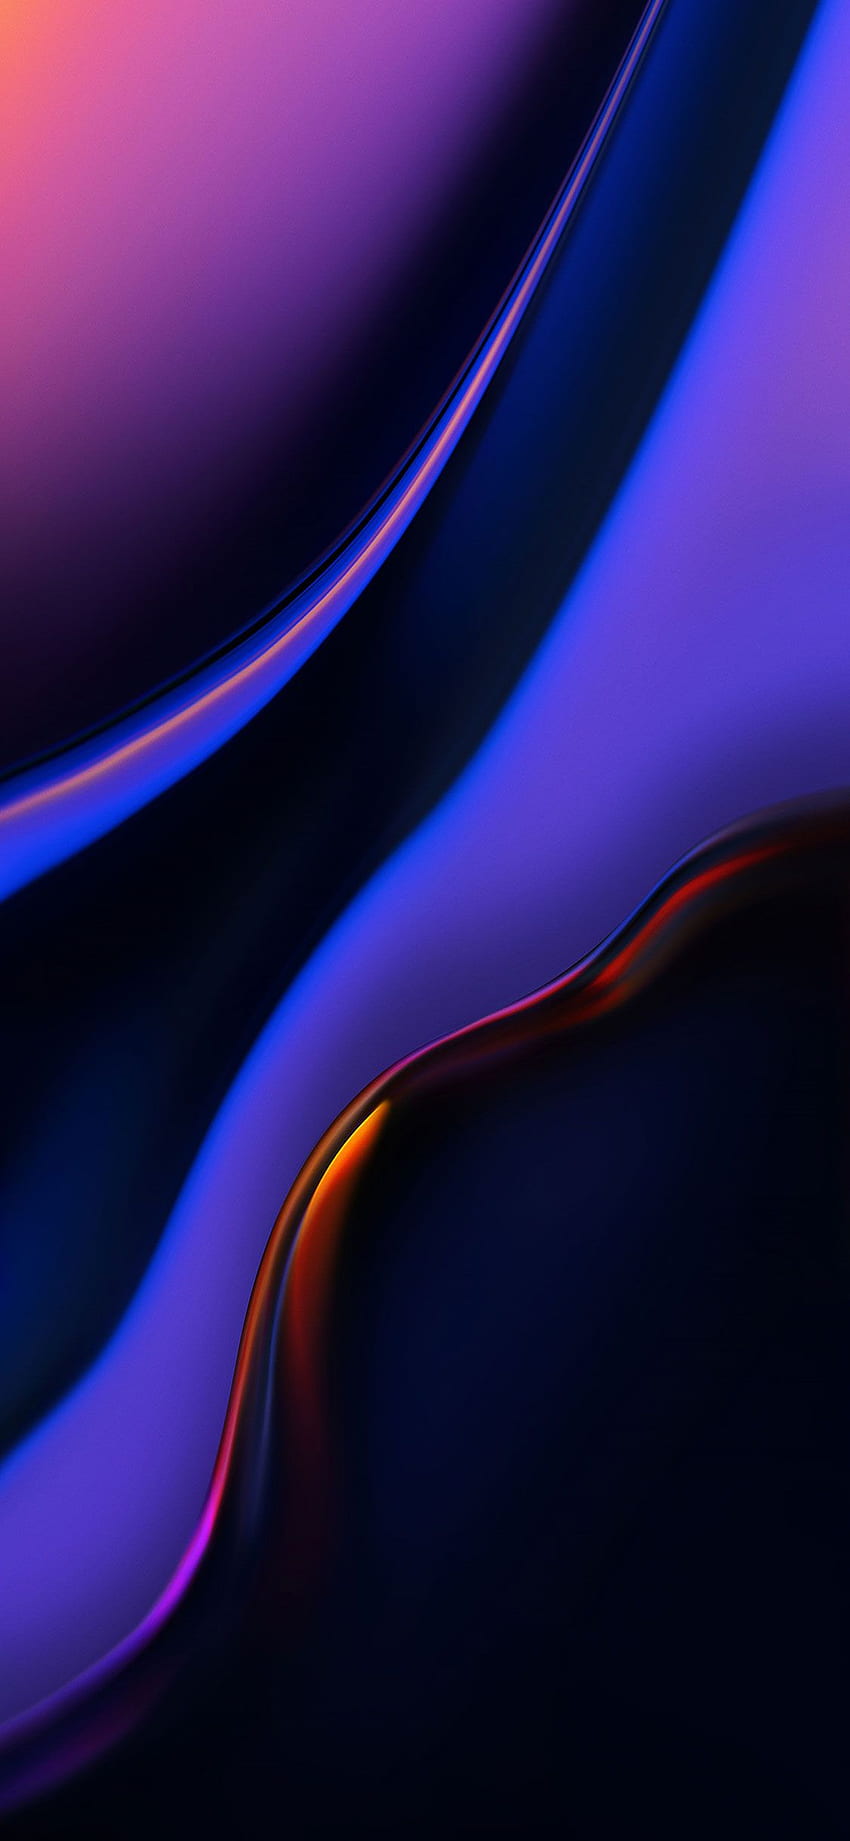 Latest Best iPhone X & Background For Everyone, Liquid X HD phone wallpaper